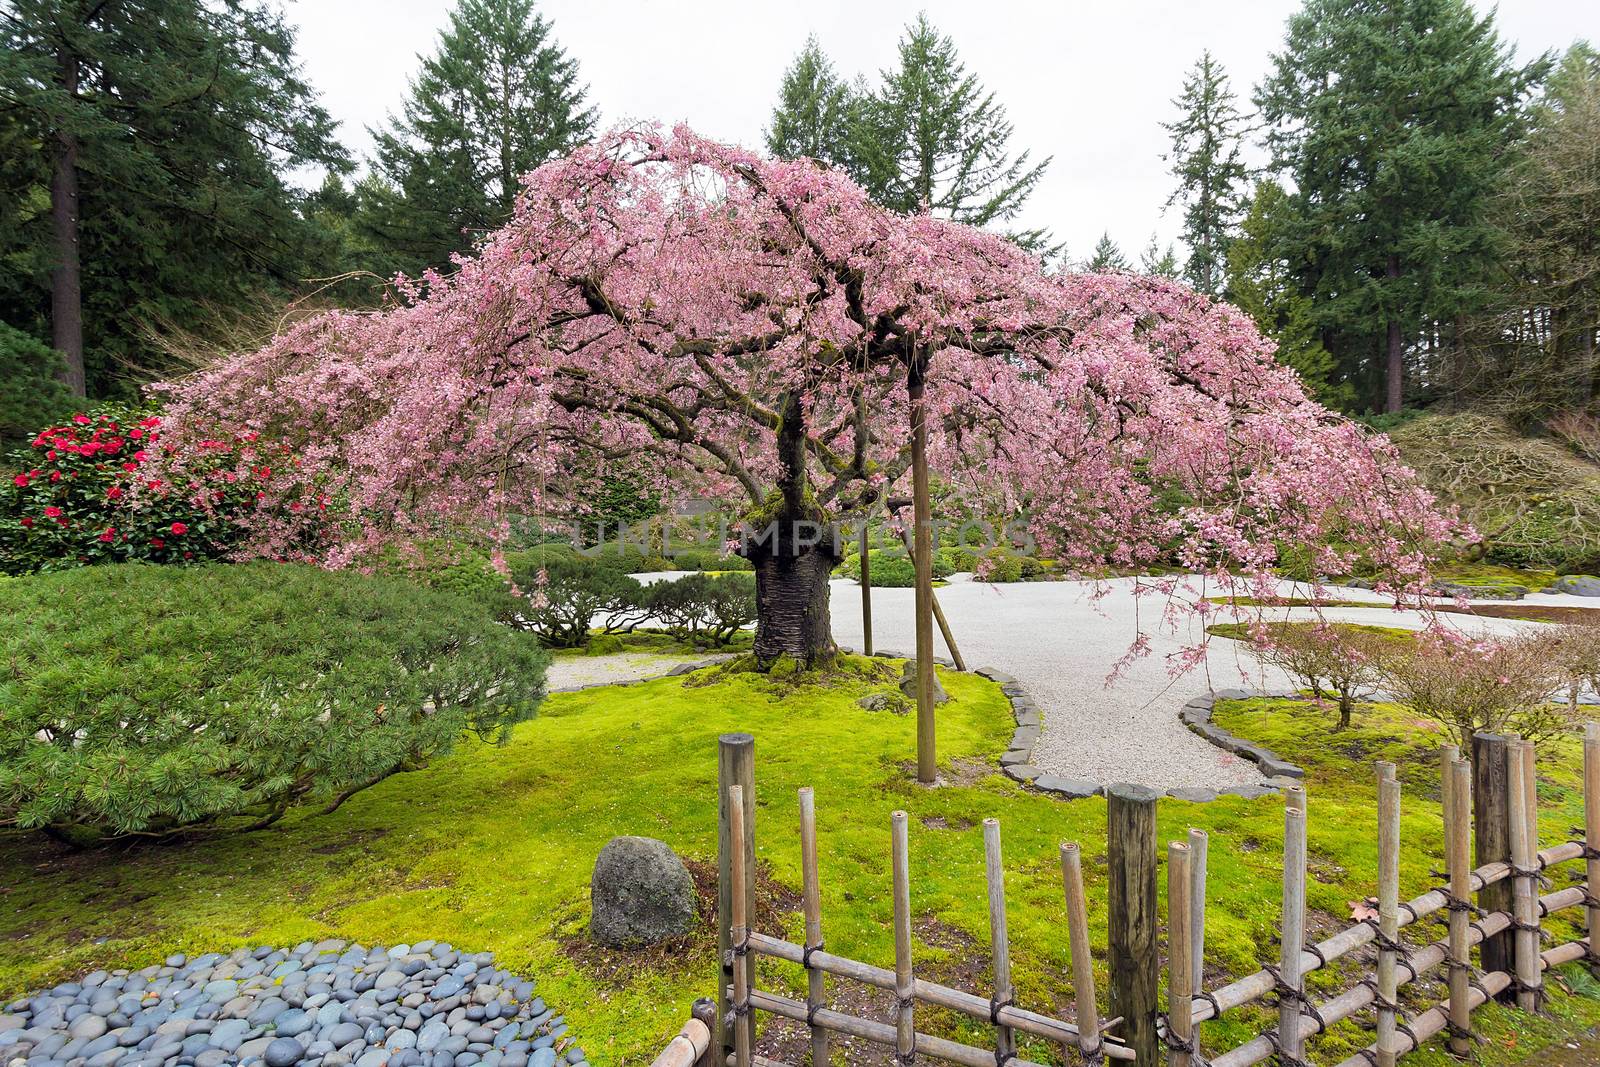 The Pink Cherry Blossom Tree in Bloom at the Japanese Garden in Spring